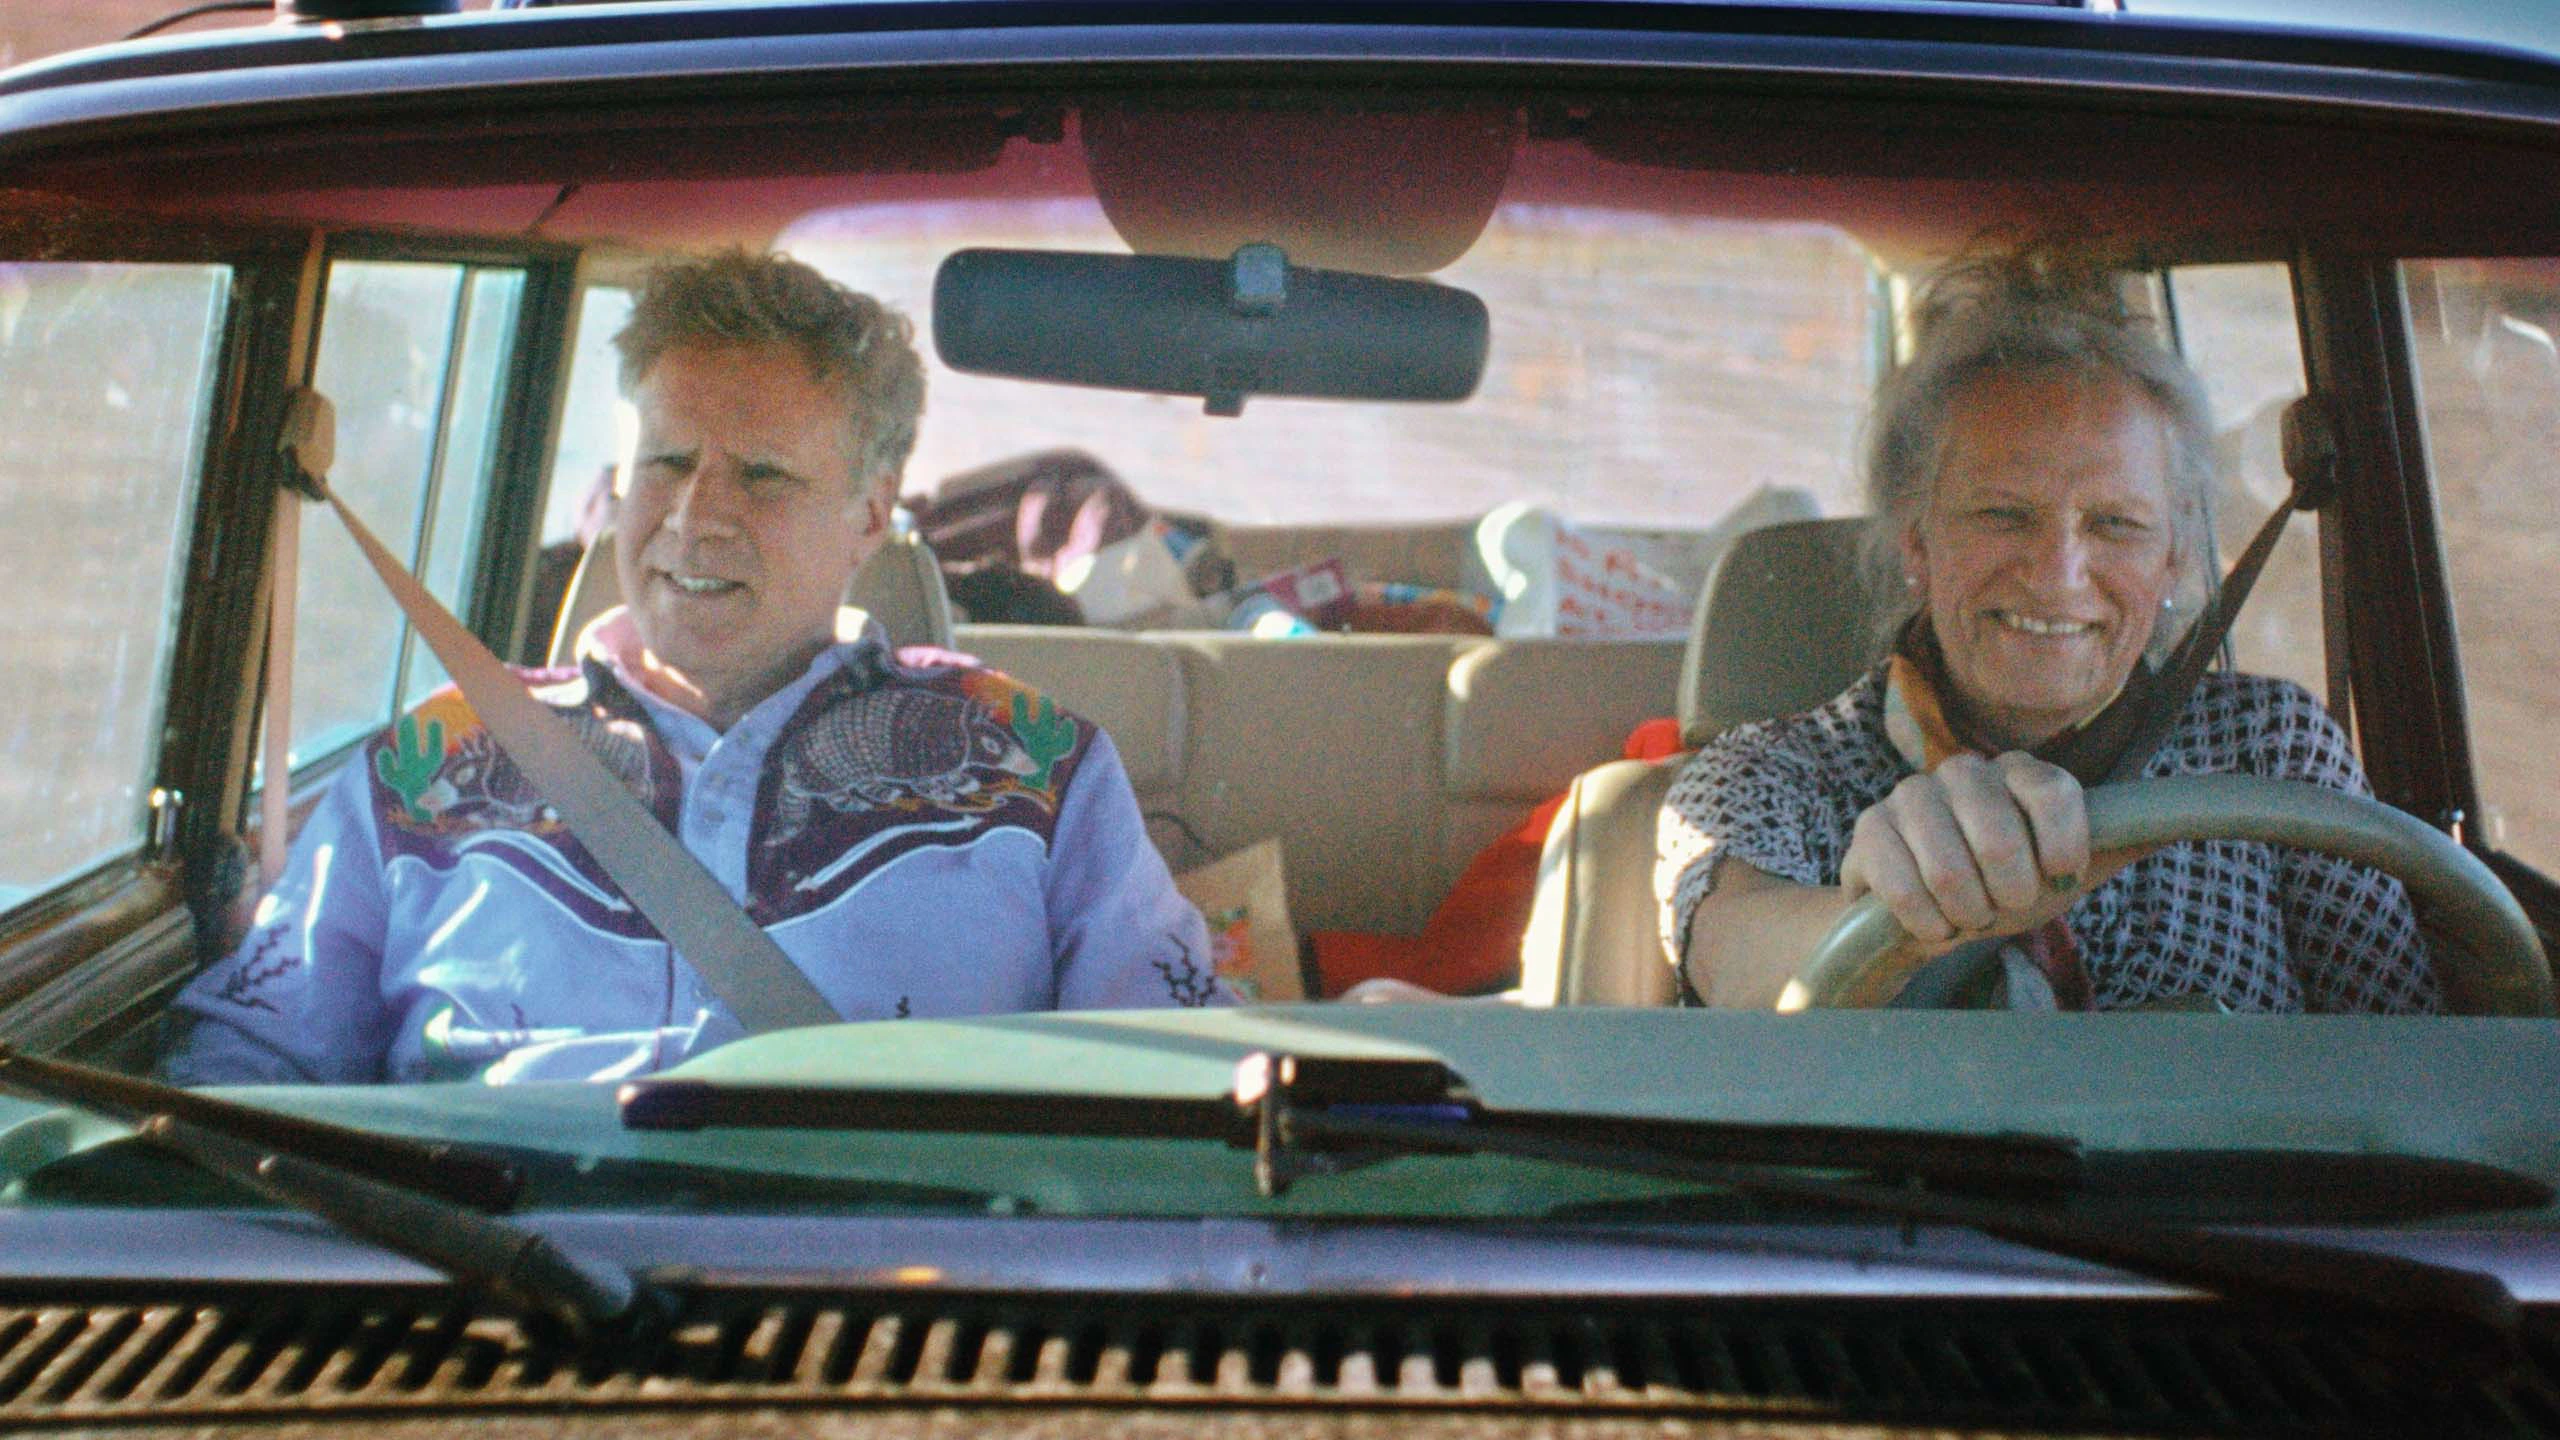 Will Ferrell and Harper Steele sit in the front seat of a car together.